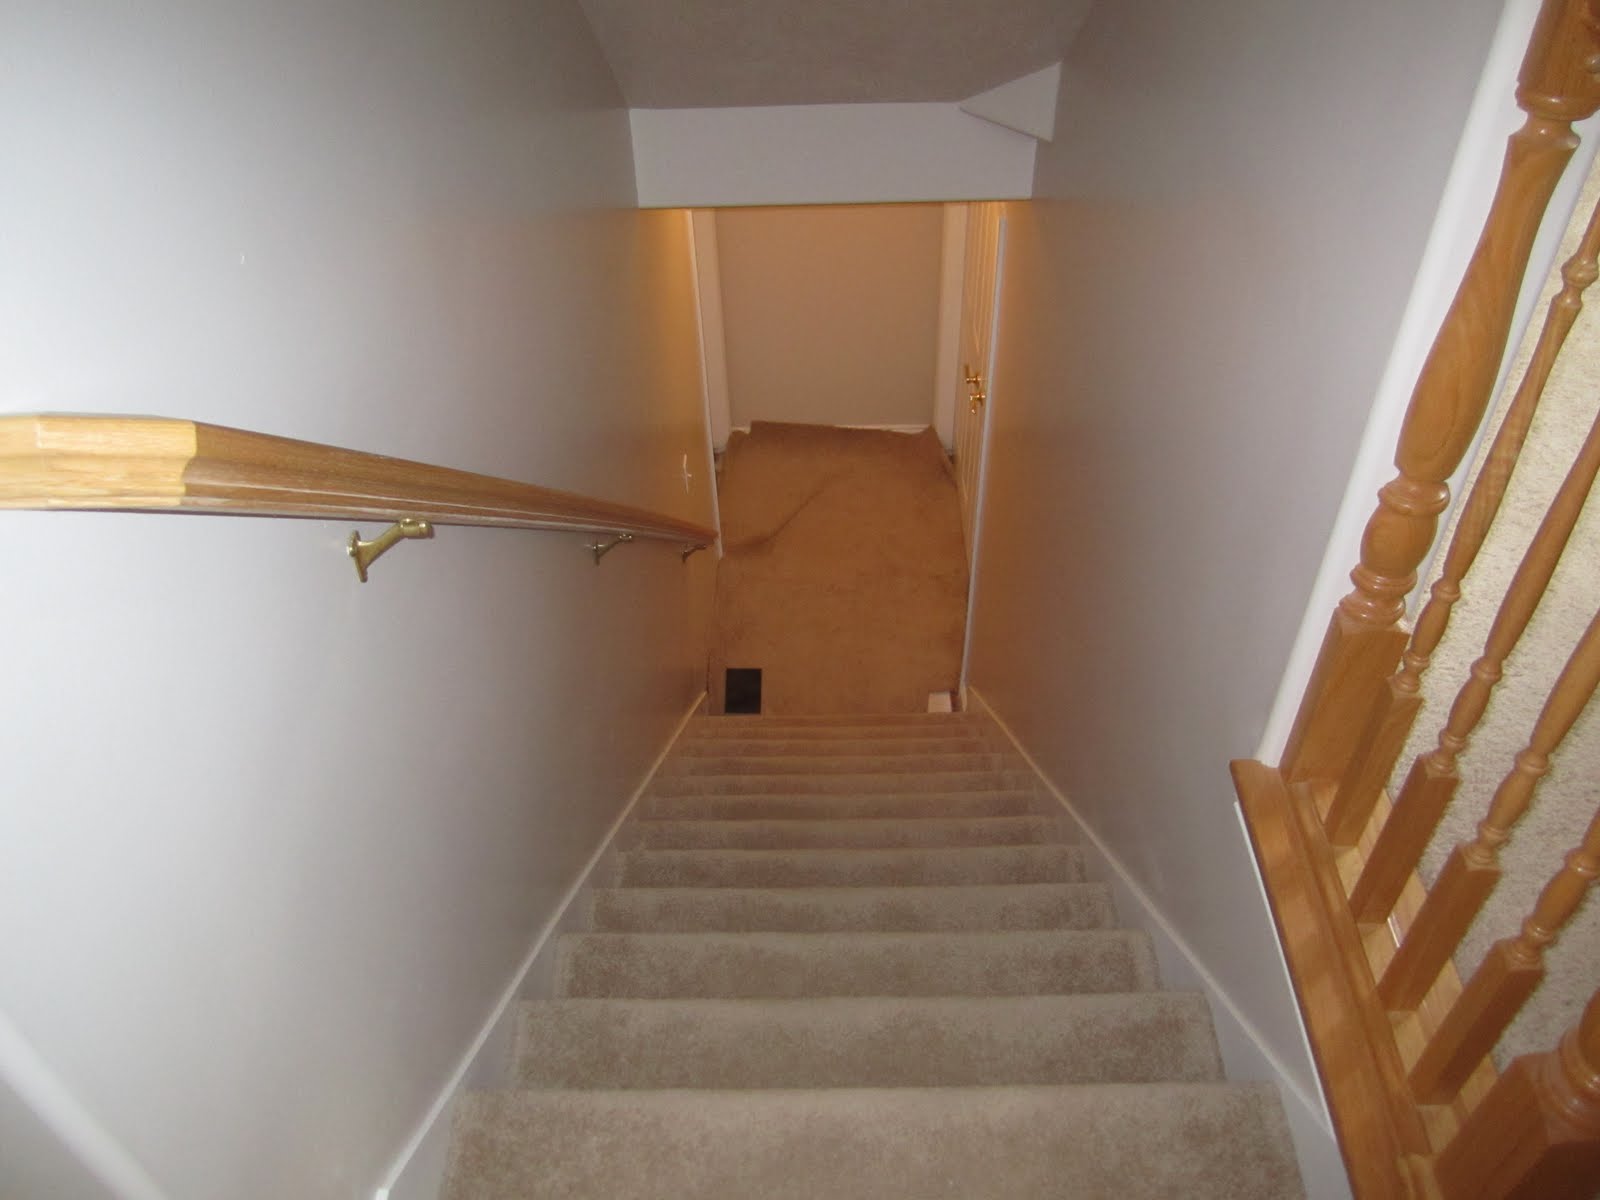 Basement Stairs Looking Down: More than10 ideas - Home cosiness